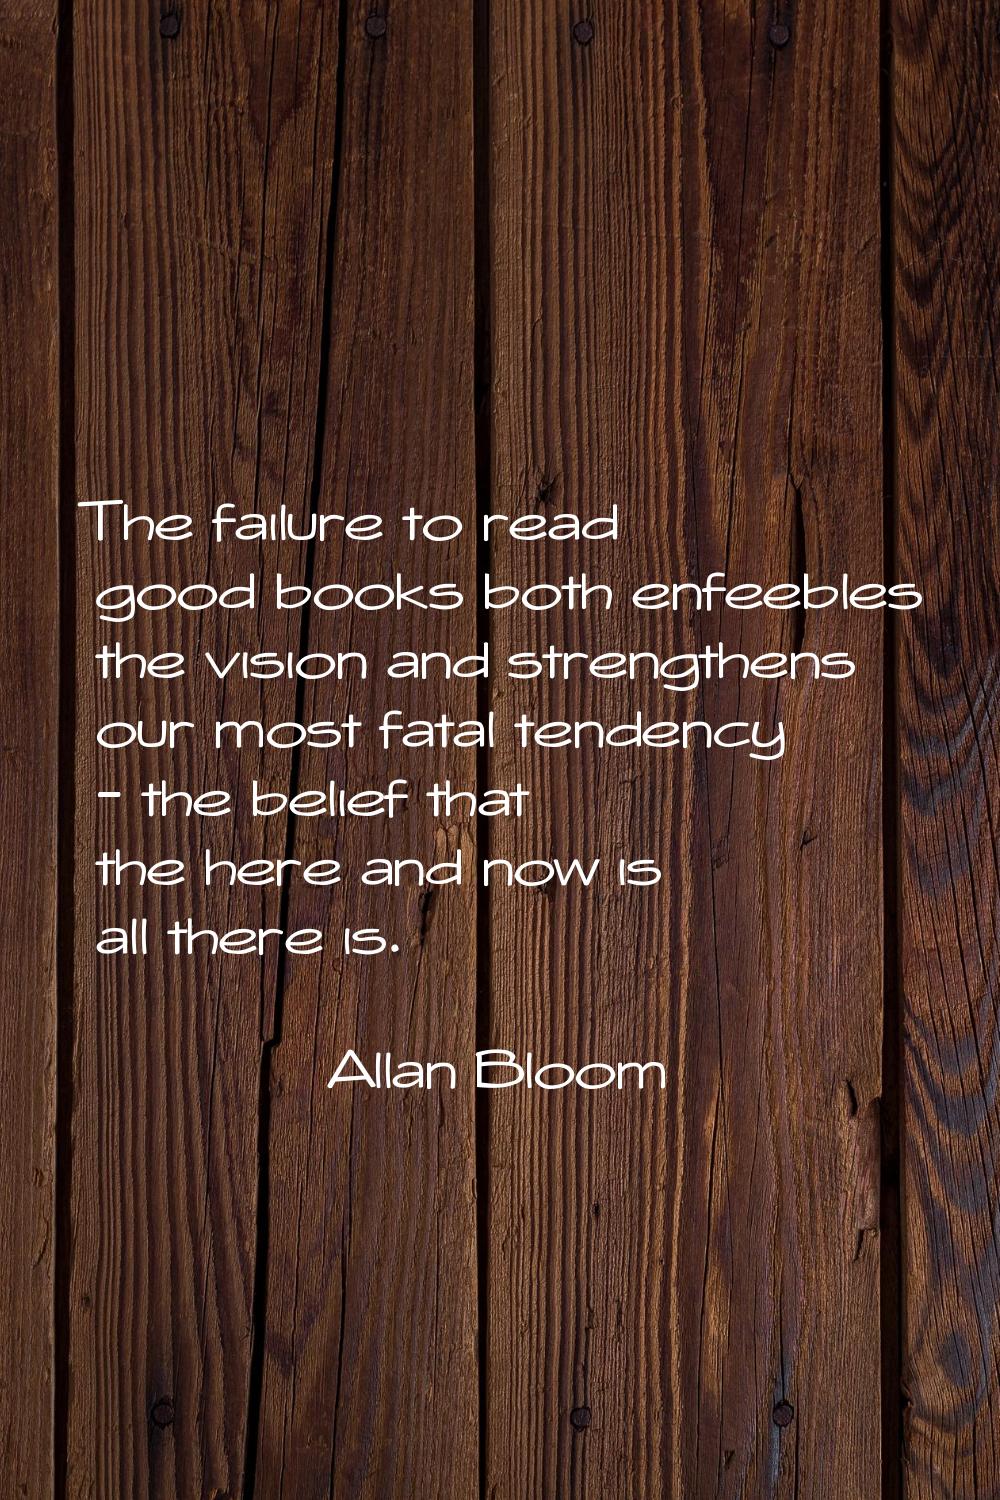 The failure to read good books both enfeebles the vision and strengthens our most fatal tendency - 